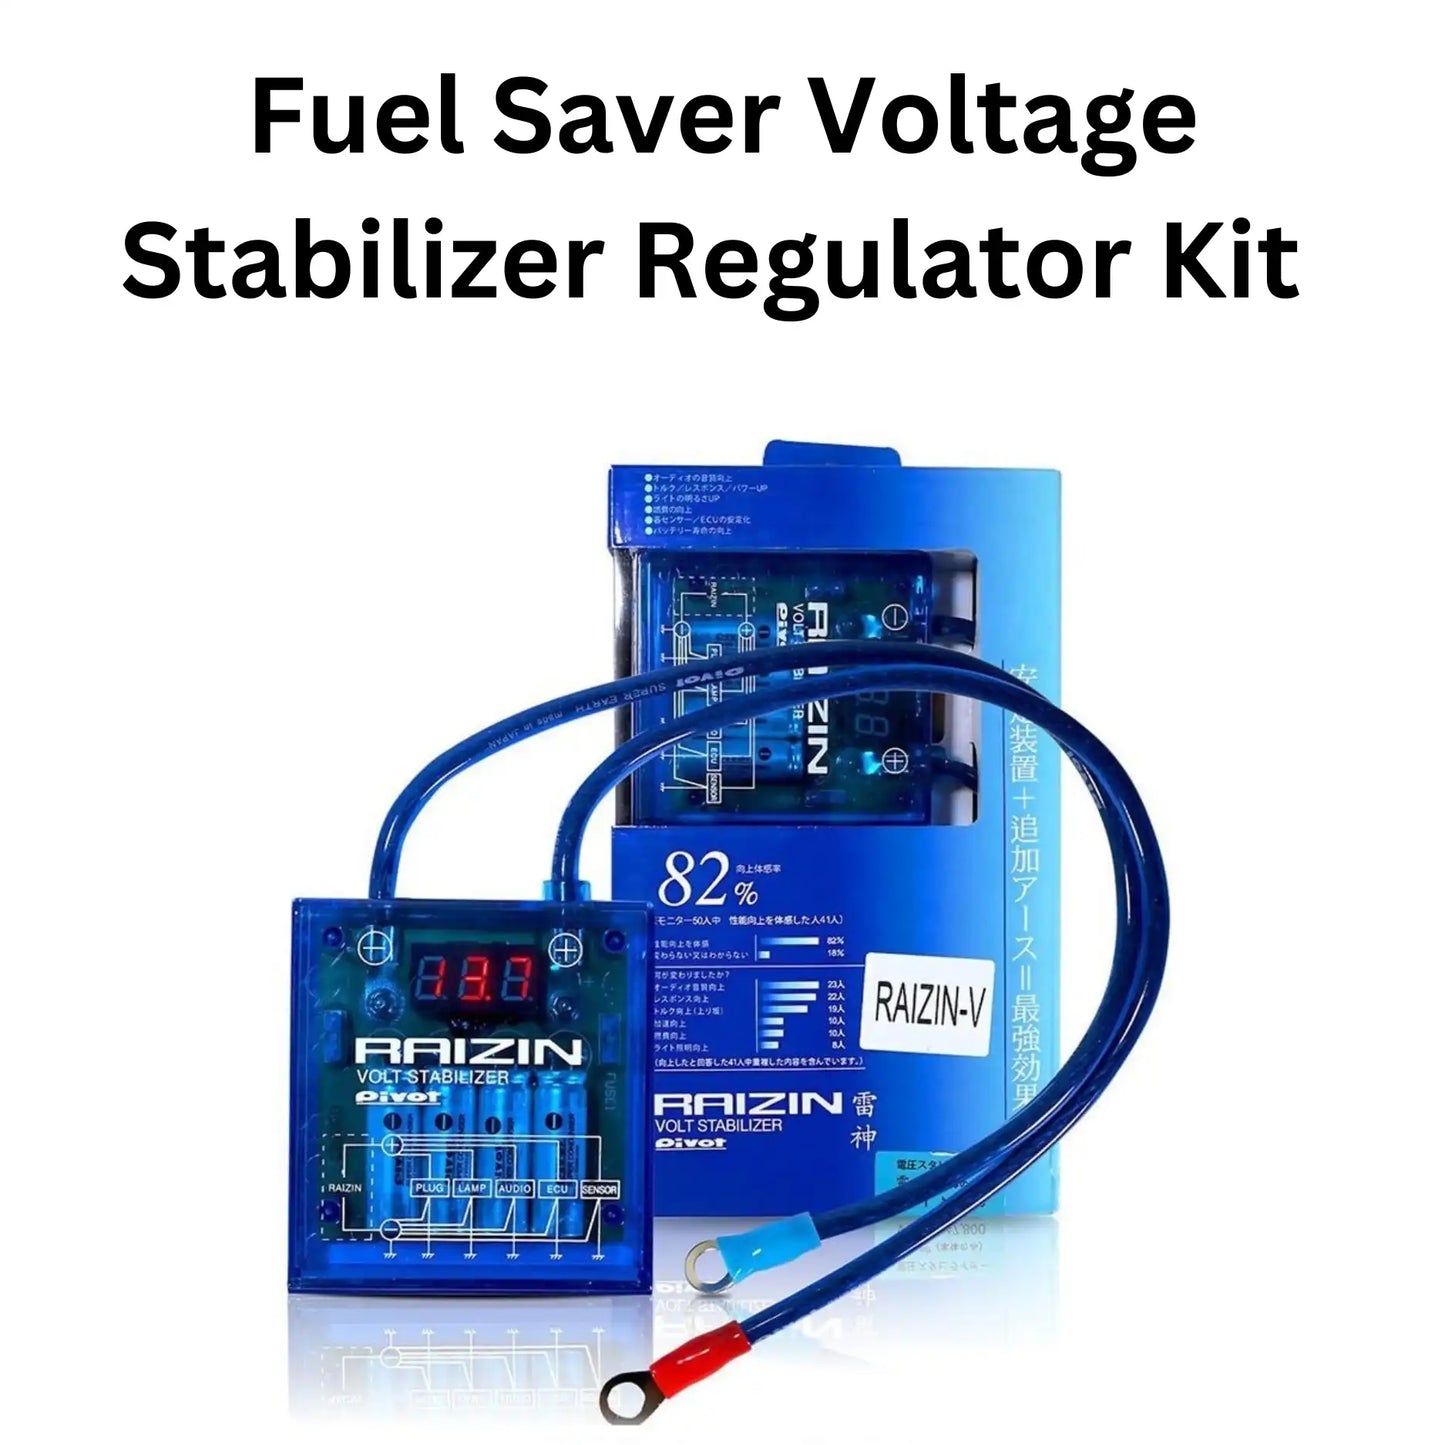 Universal Car Fuel Saver Voltage Stabilizer Regulator Kit with 3 Earth Ground Cables for Car Truck